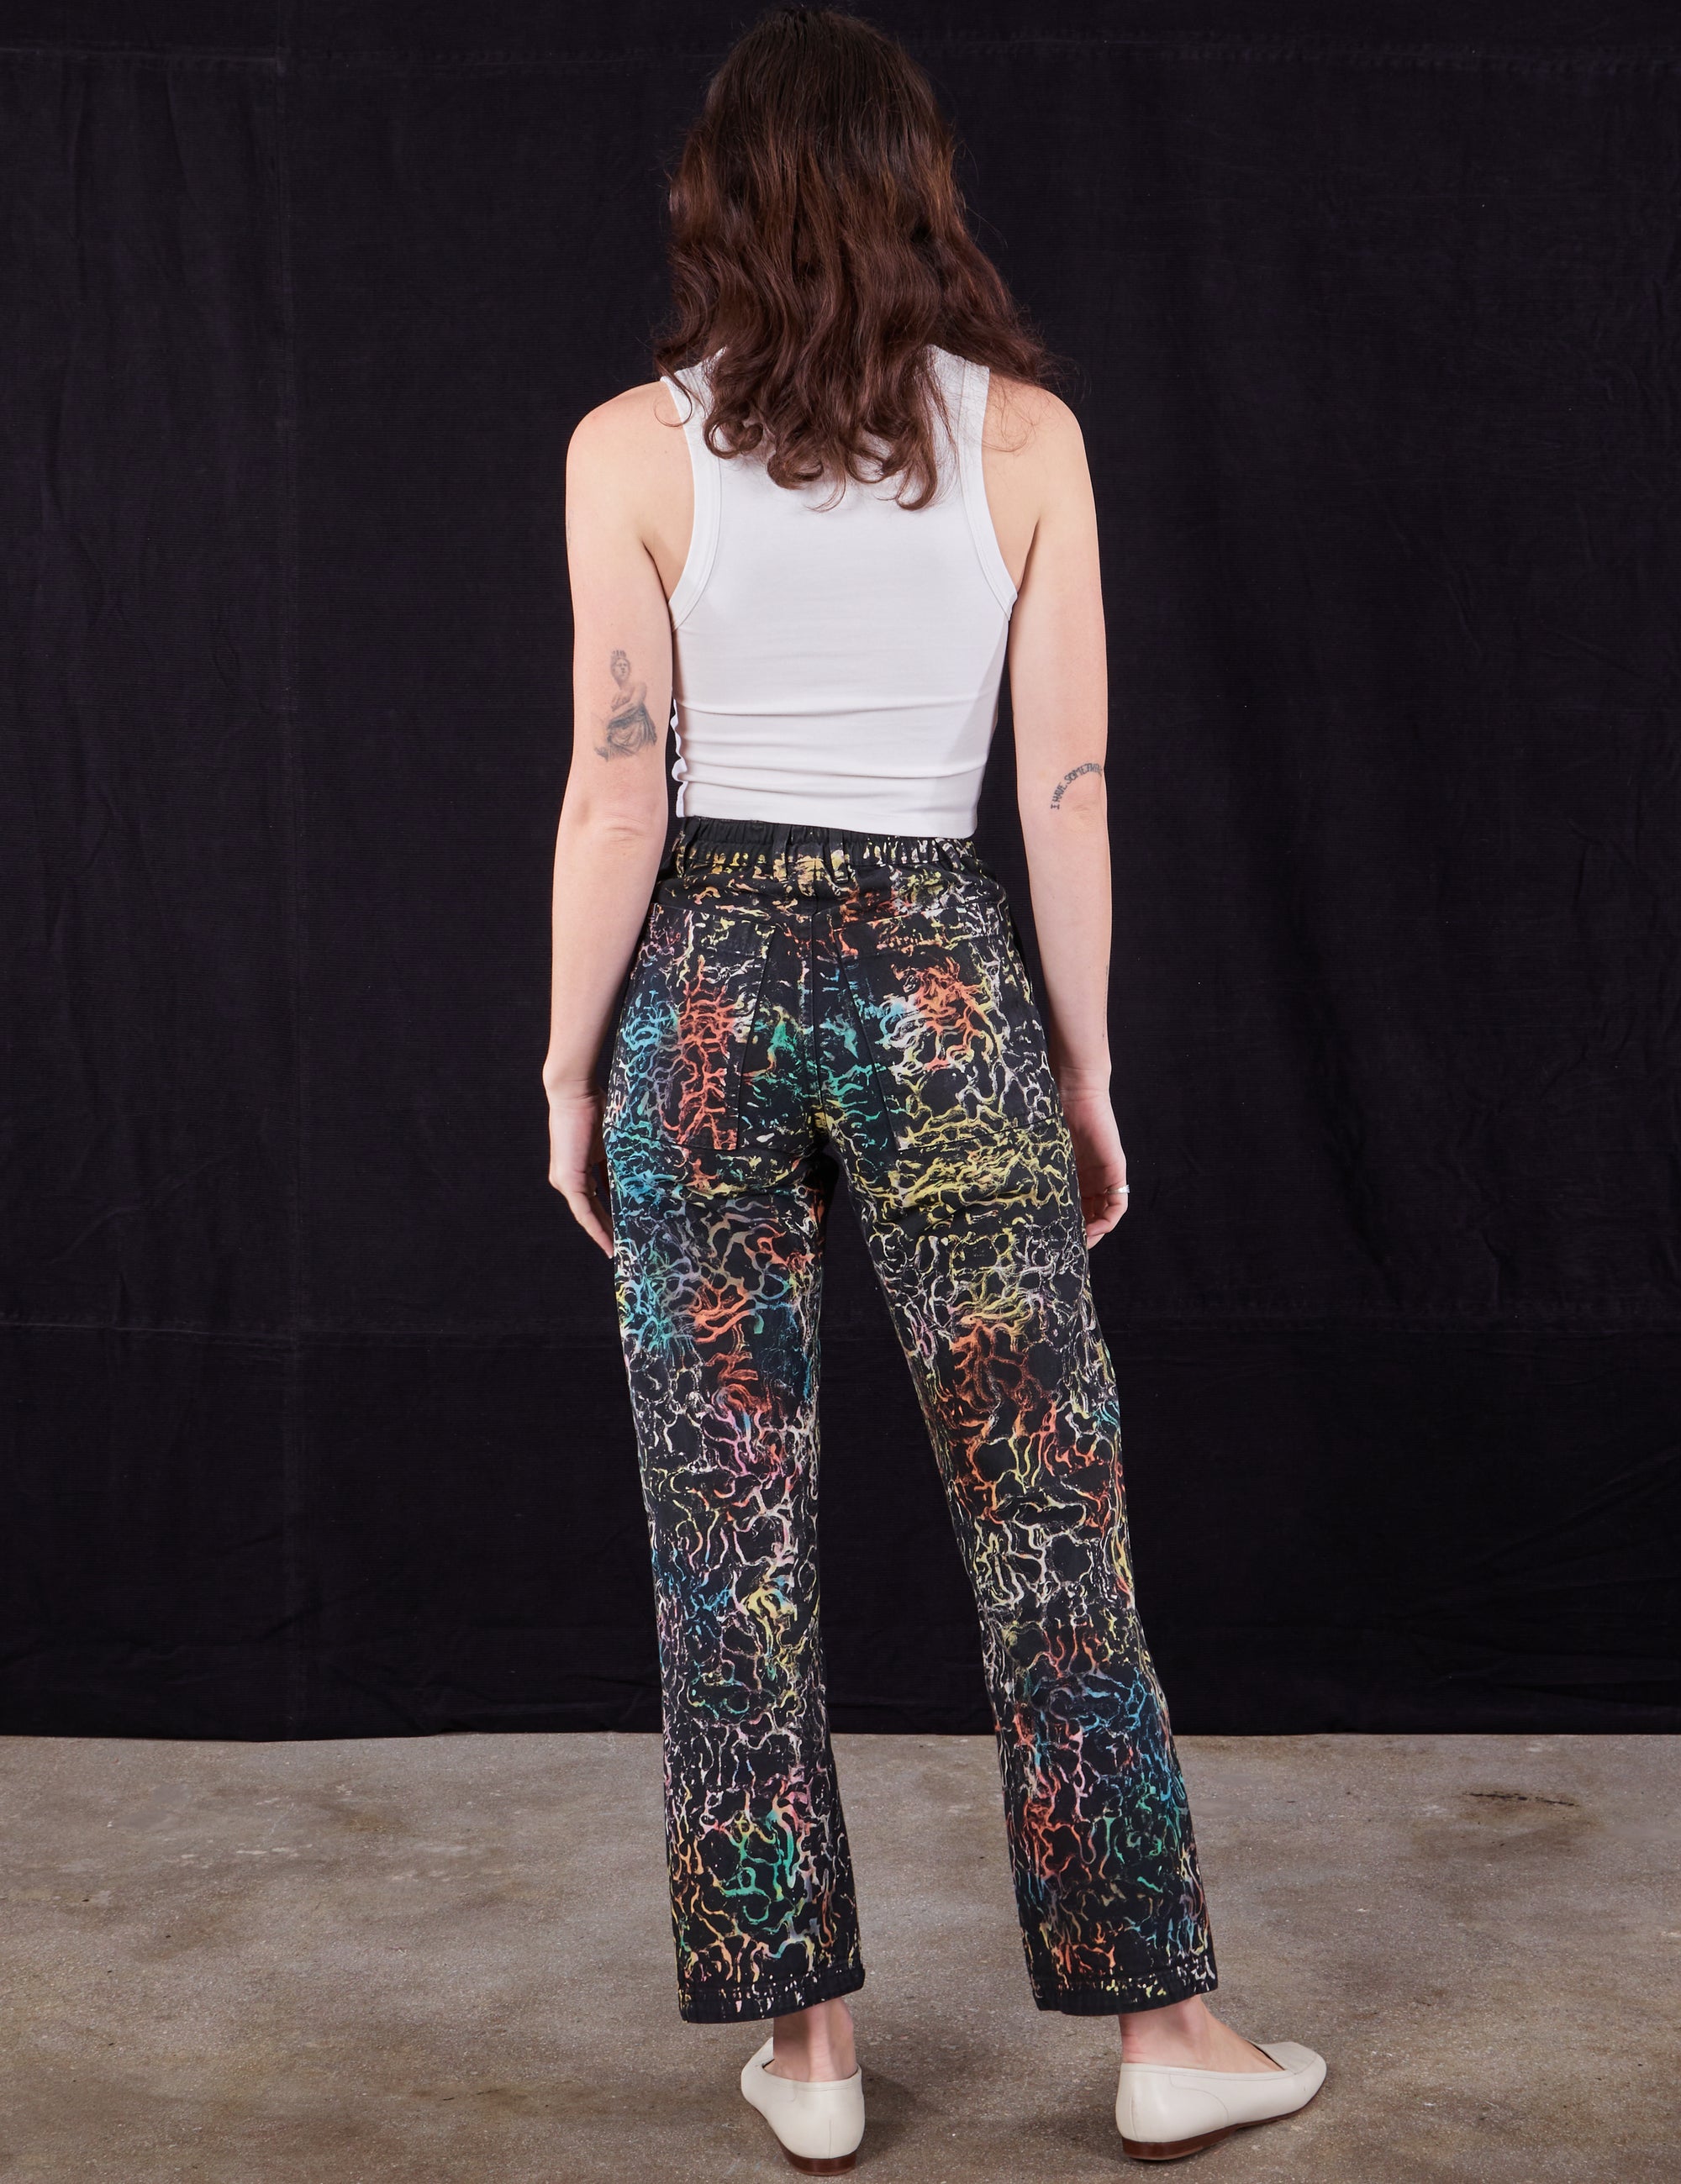 Back view of Wavy Dye Work Pants and vintage off-white Cropped Tank Top on Alex